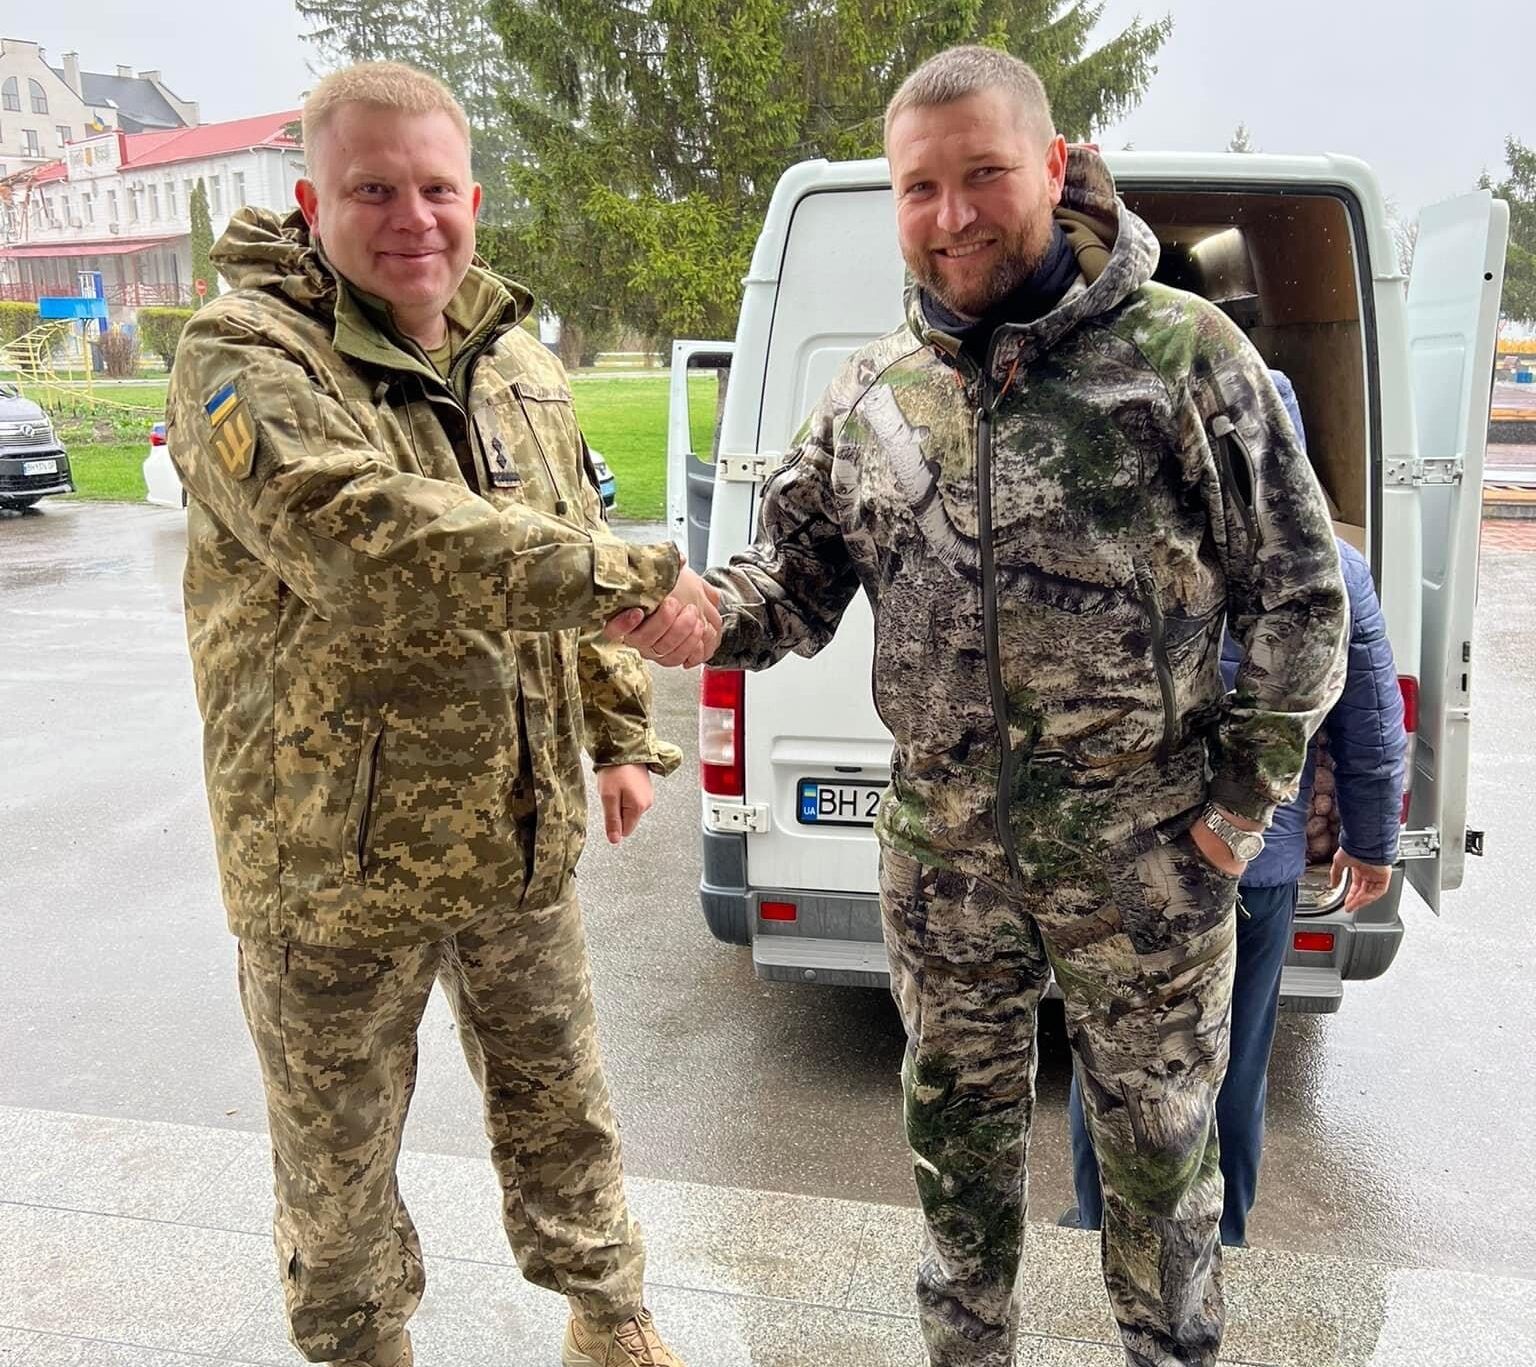 Handover of a generator to the border guards